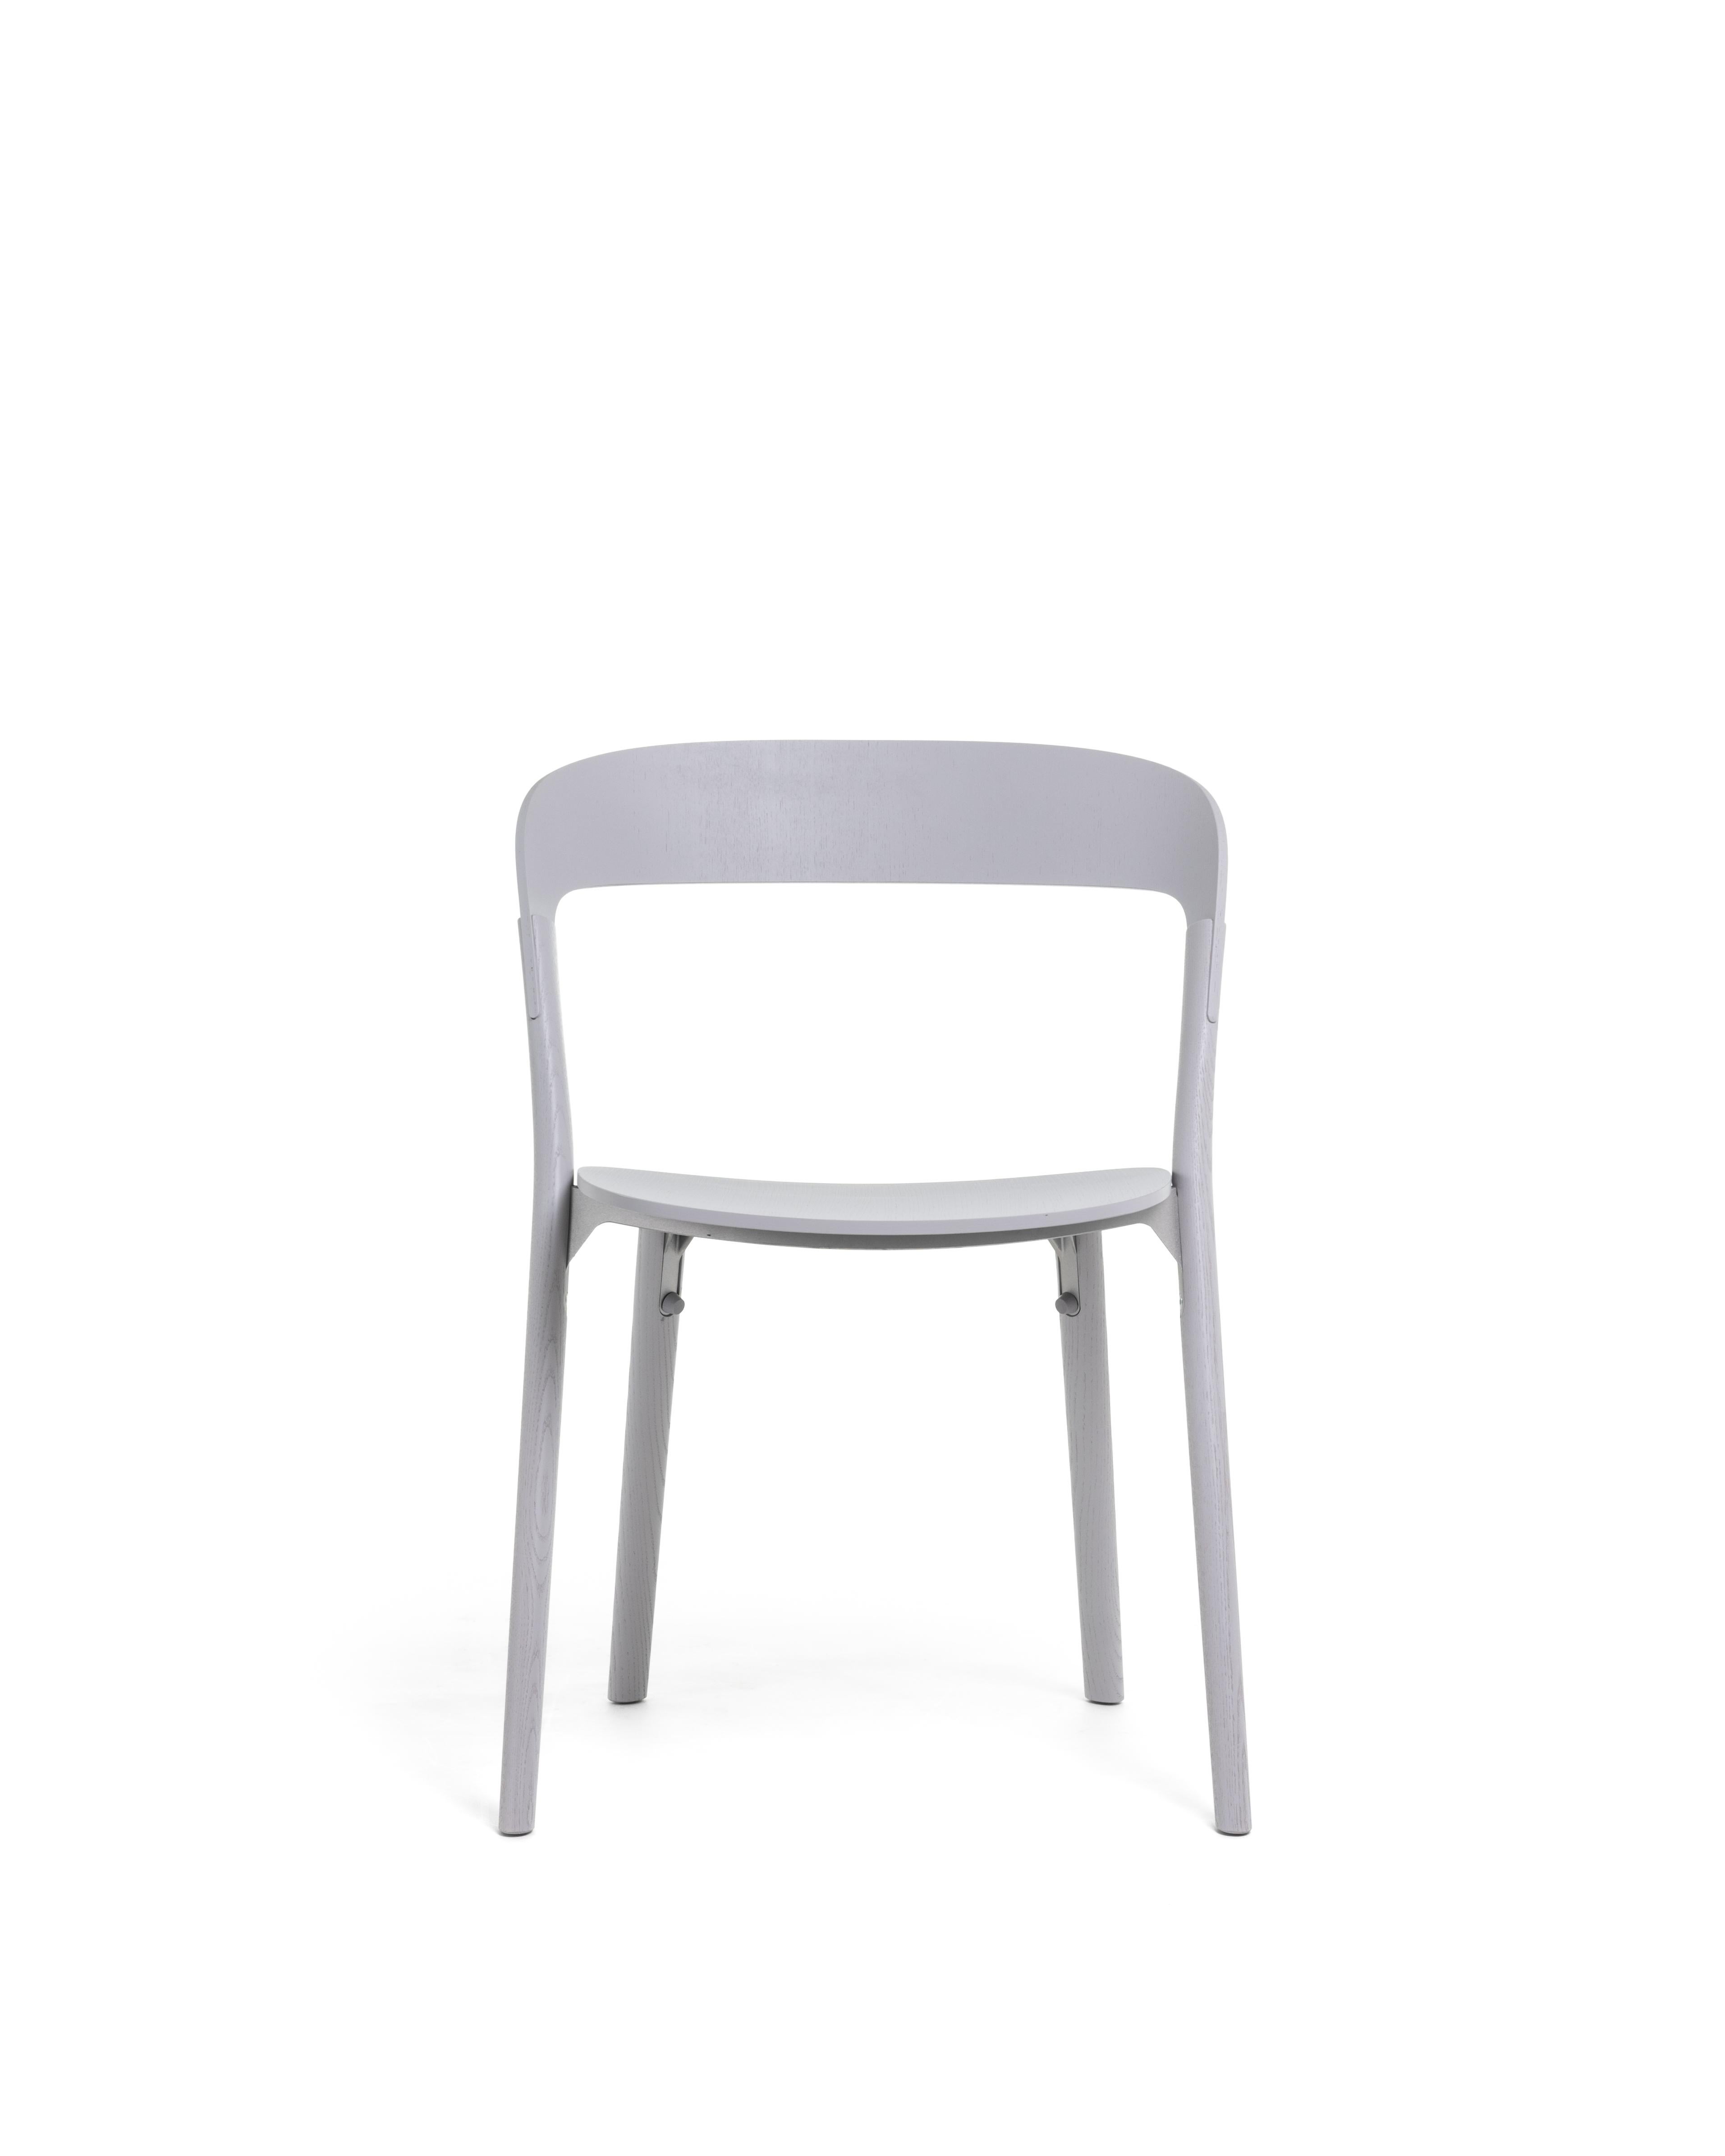 Set of 2 Pila Stacking Chair by Ronan & Erwan Boroullec for MAGIS In New Condition For Sale In Brooklyn, NY